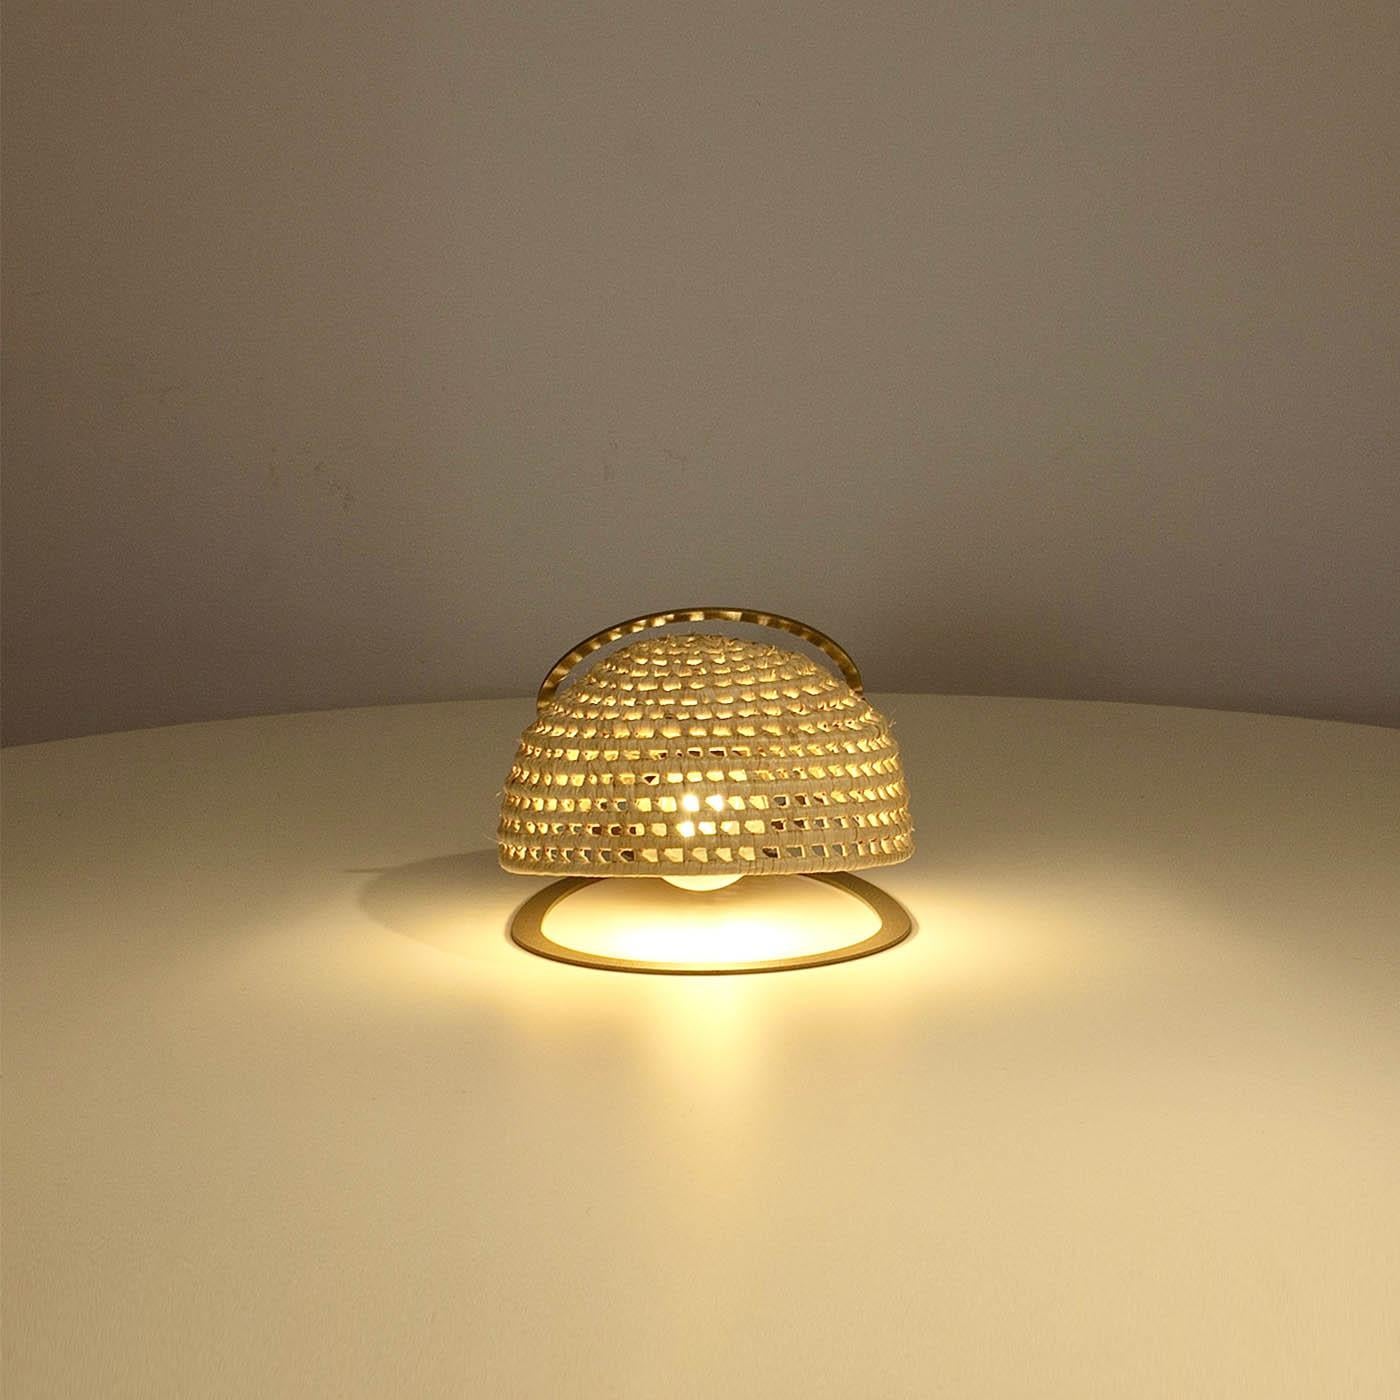 Prized as the best work of its category in the Novos Talentos Brasileiros (New Brazilian Talents)
Award in 2020, the Tatubepa lamp is a piece with unique and valuable design. It was inspired by the anatomy of a typical animal from the forests of